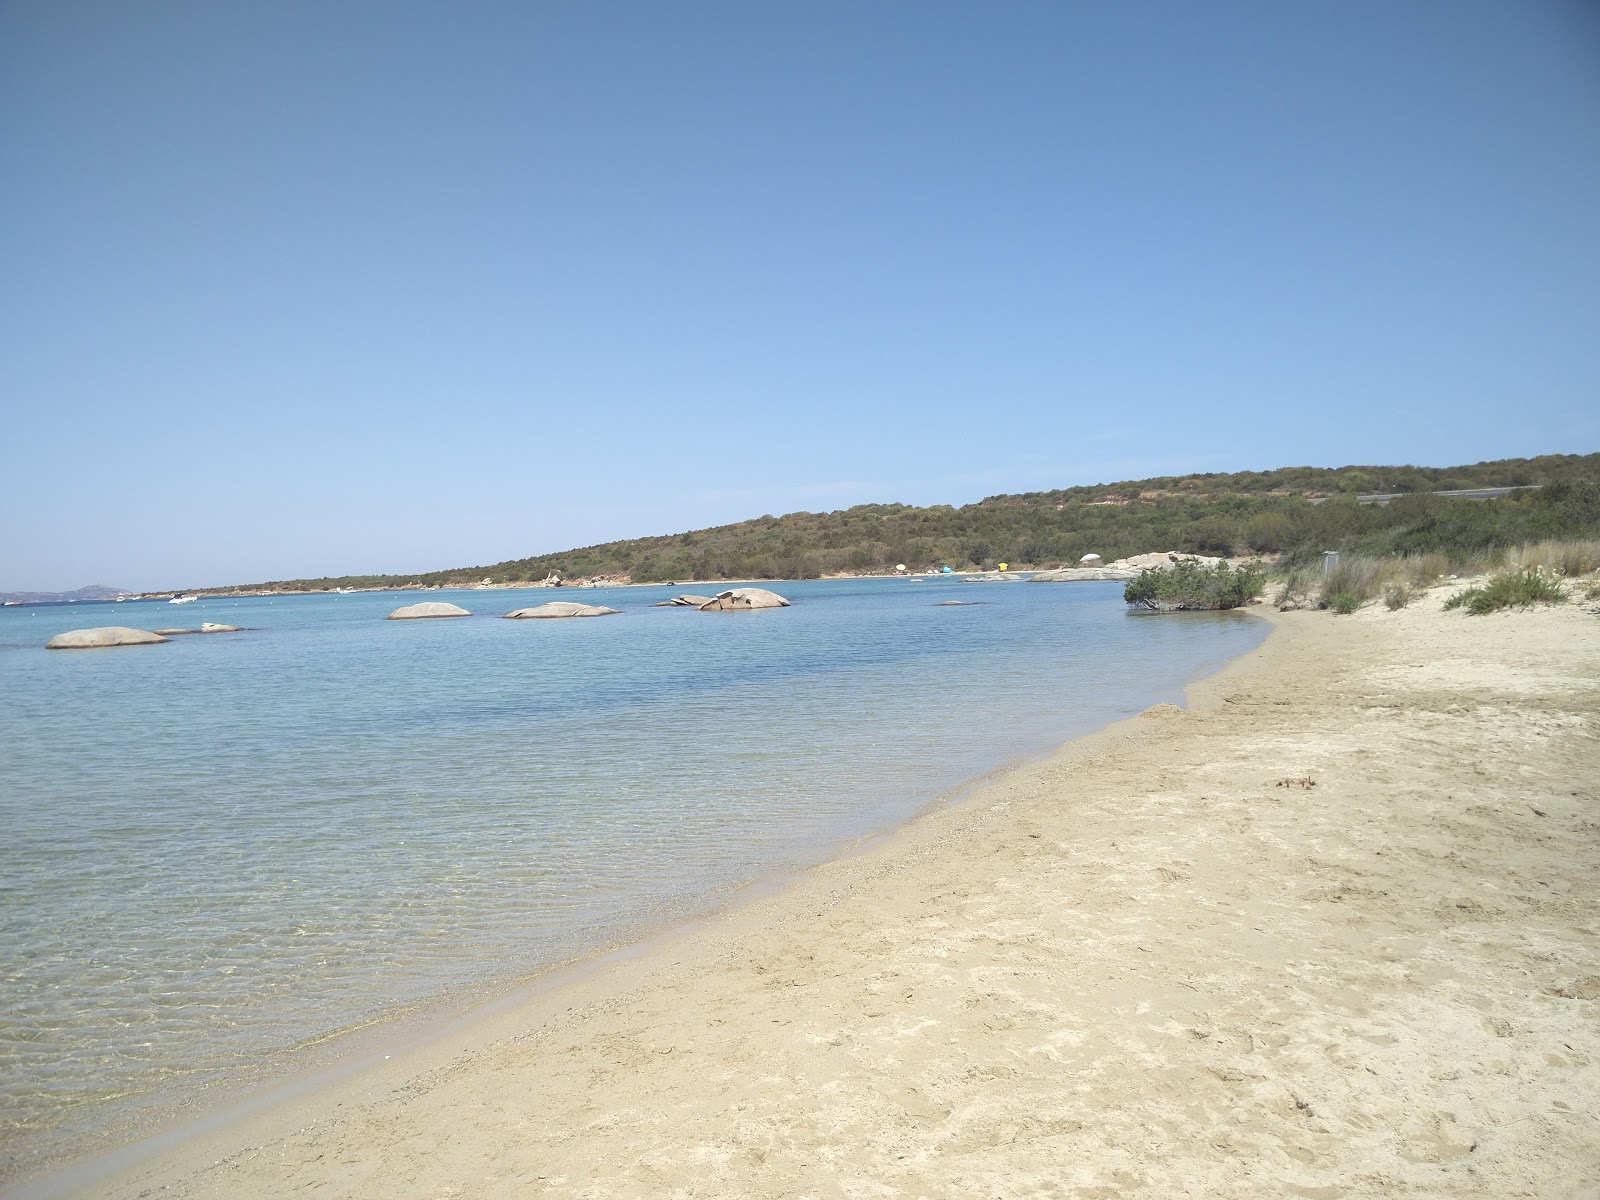 Photo of Spiaggia de Bahas and the settlement